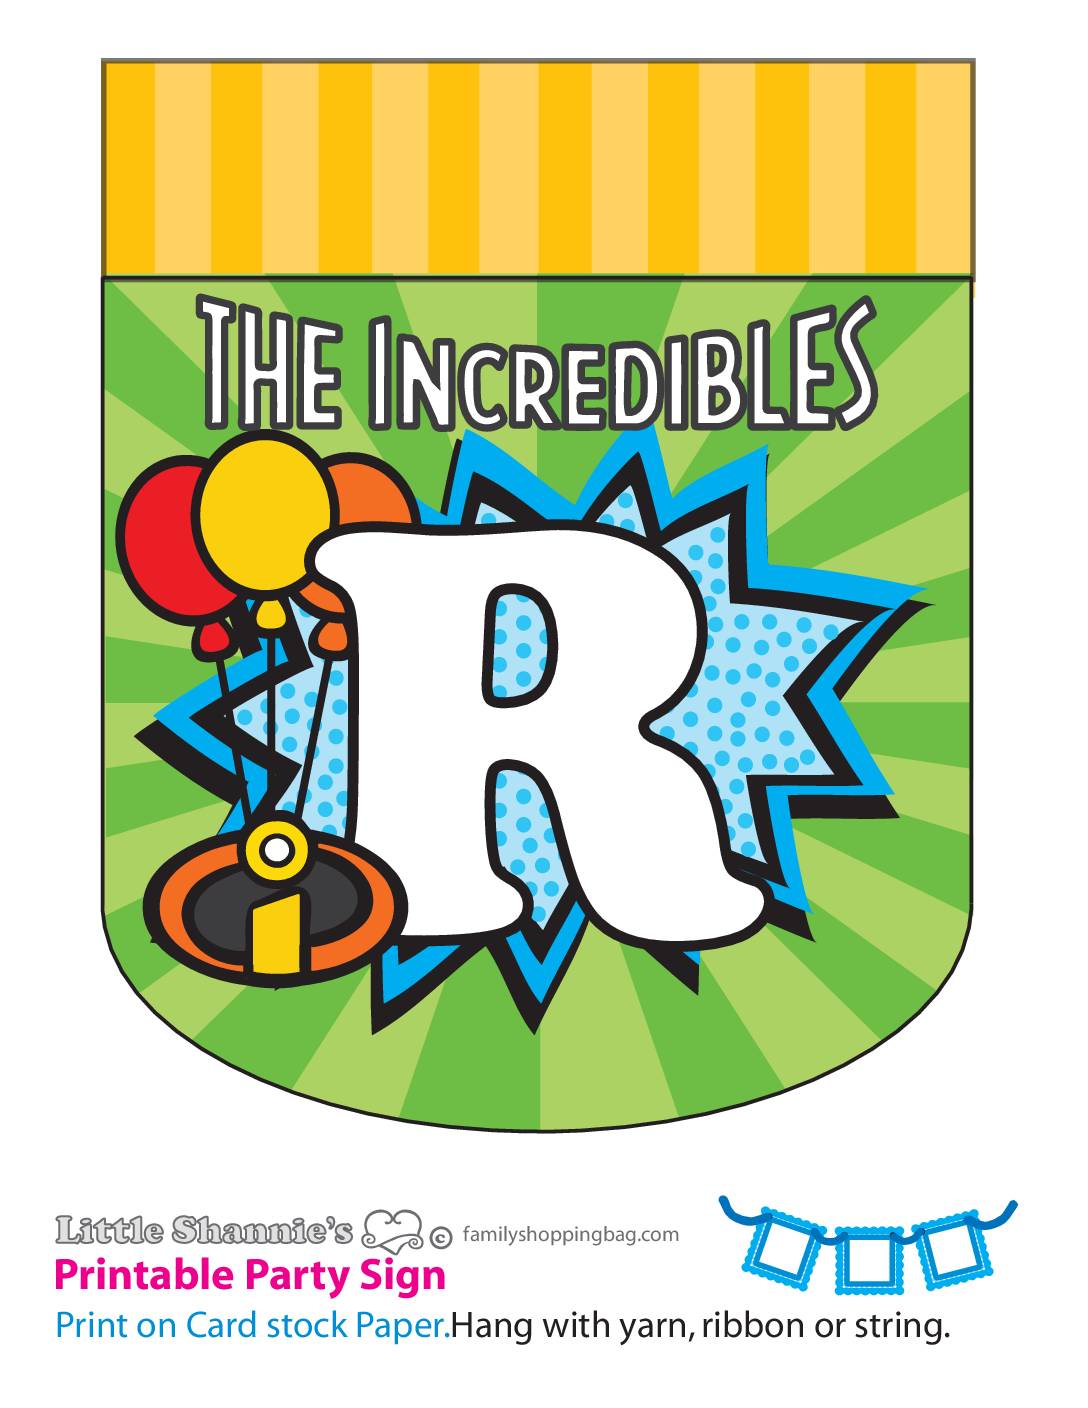 R Banner Incredibles Party Banners